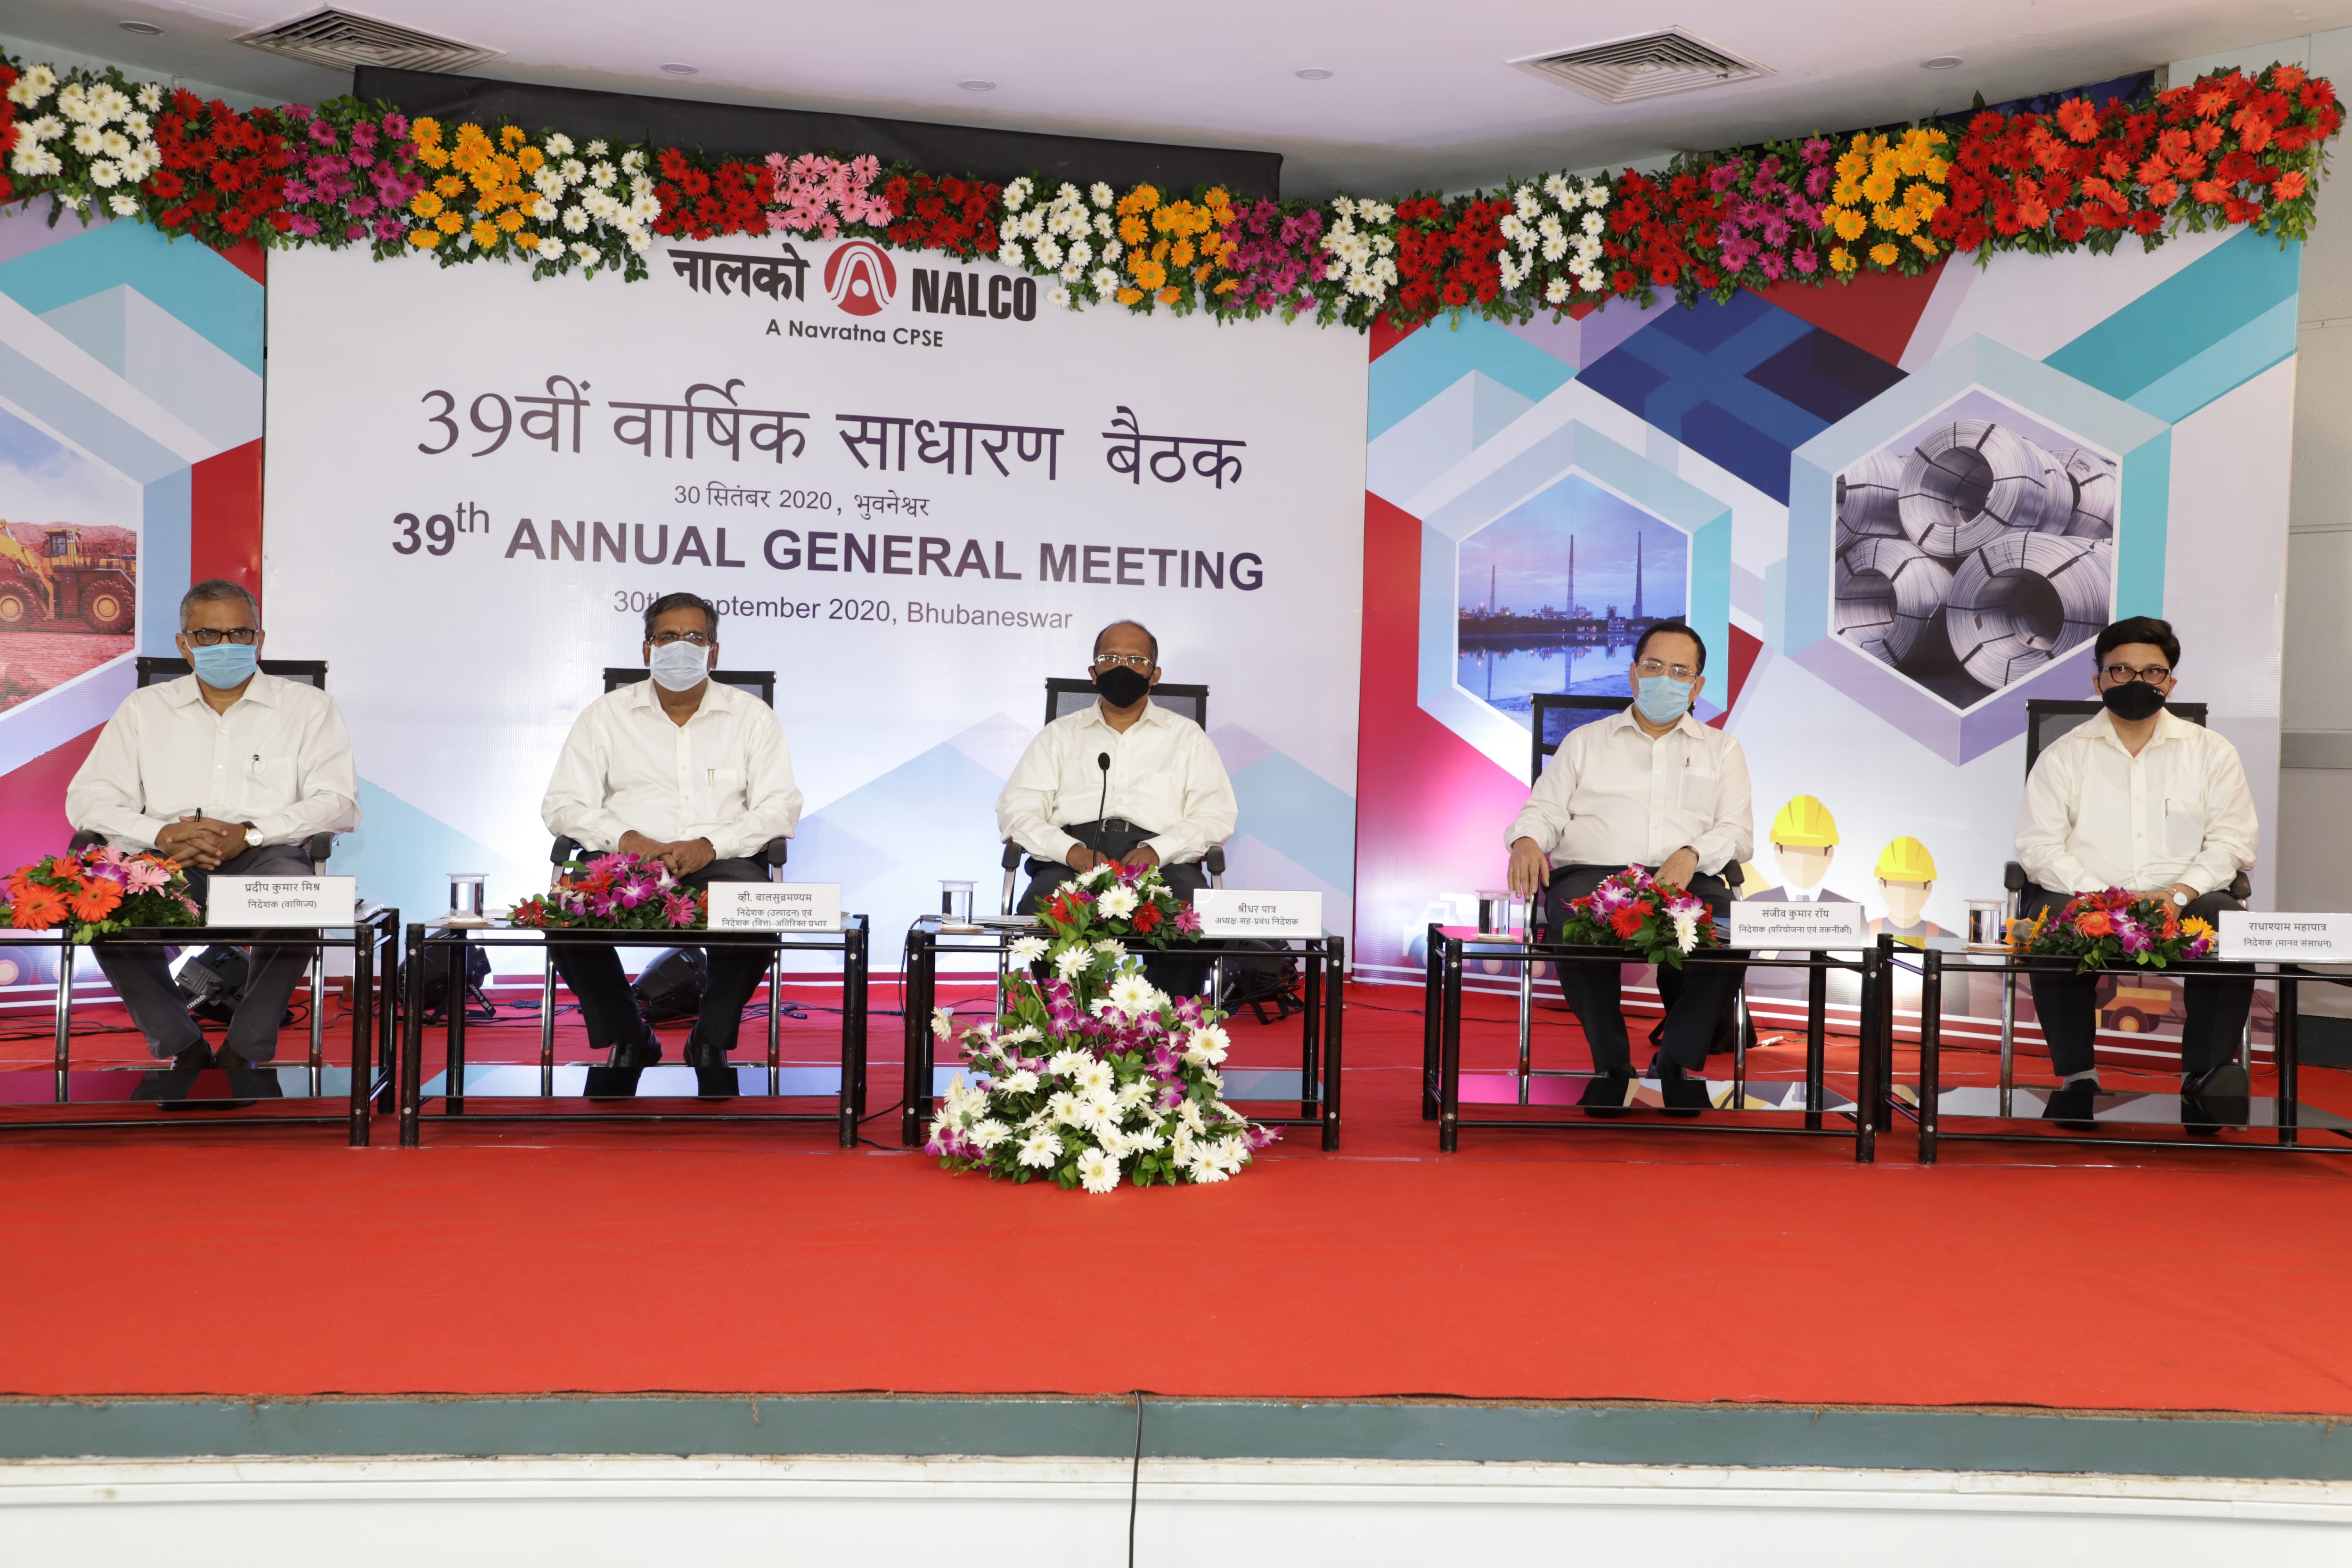 NALCO holds 39th Annual General Meeting